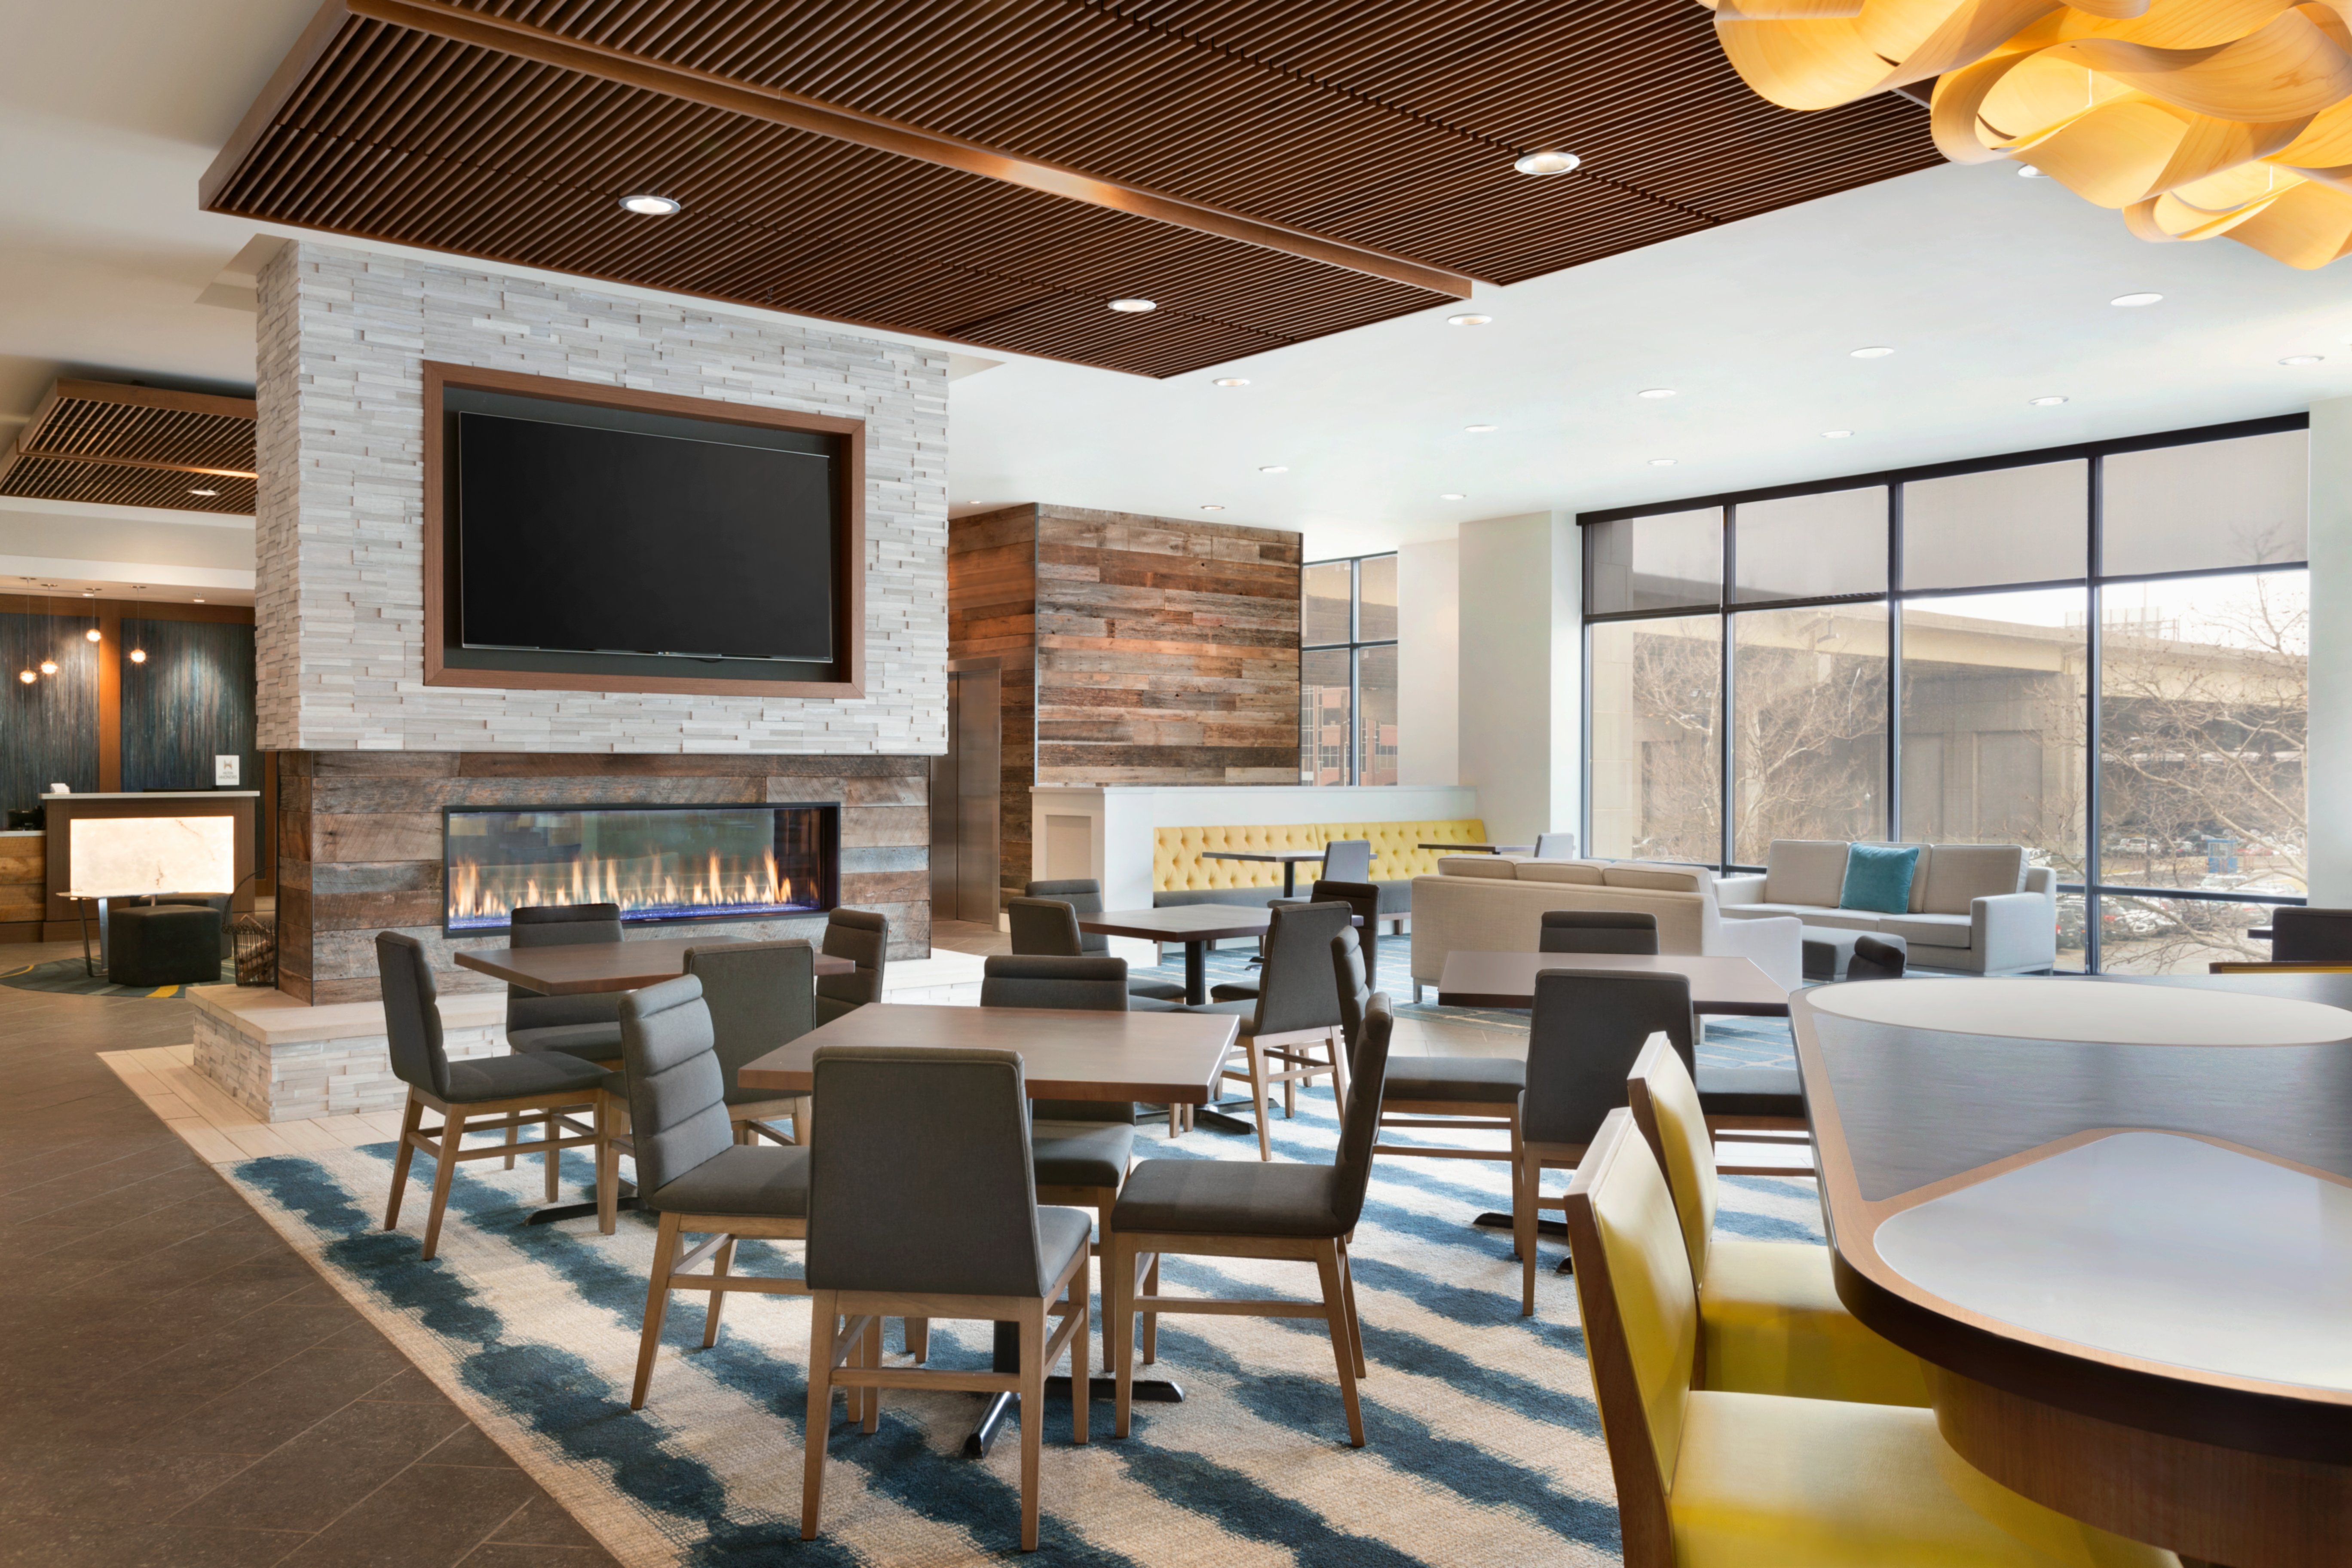 Lobby Seating Area with dining tables, TV, fire place, and windows with outdoor view